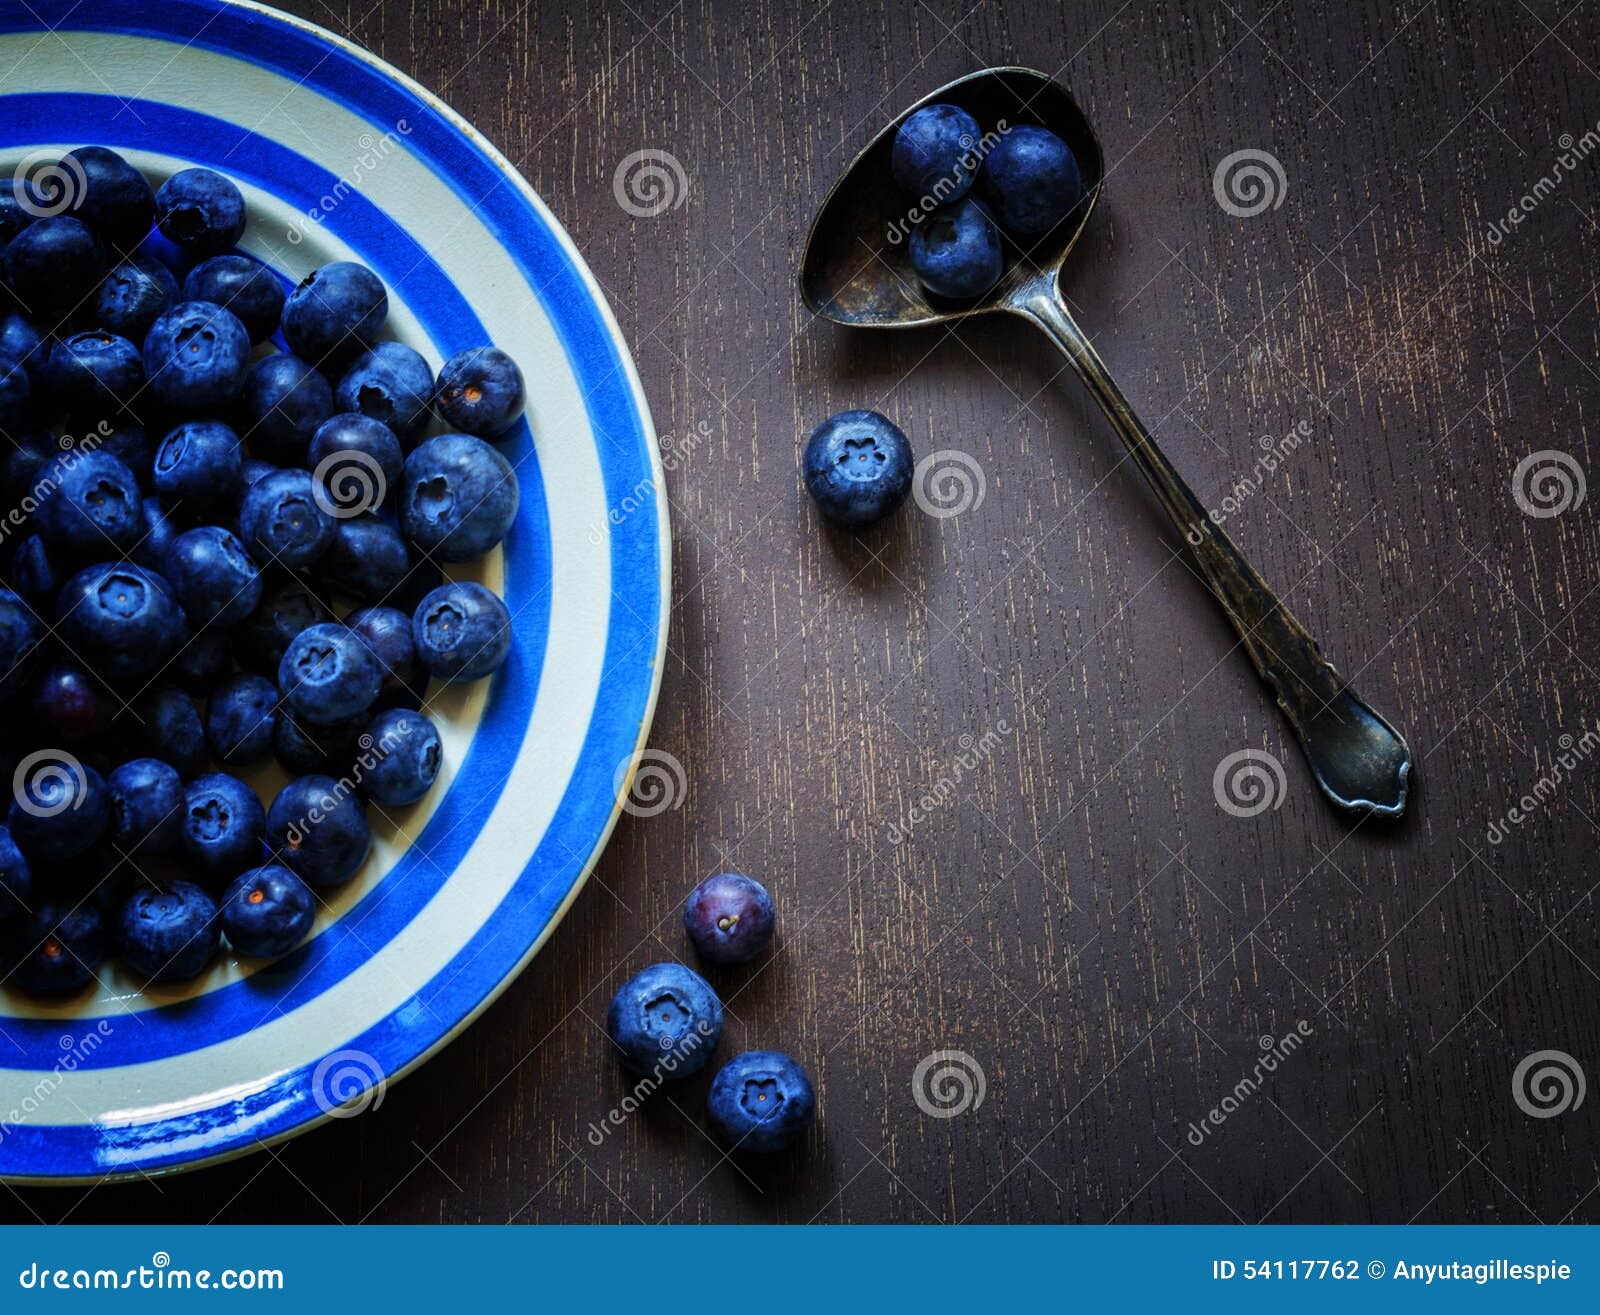 Food Photos with Blueberries Stock Photo - Image of blueberries, silver ...